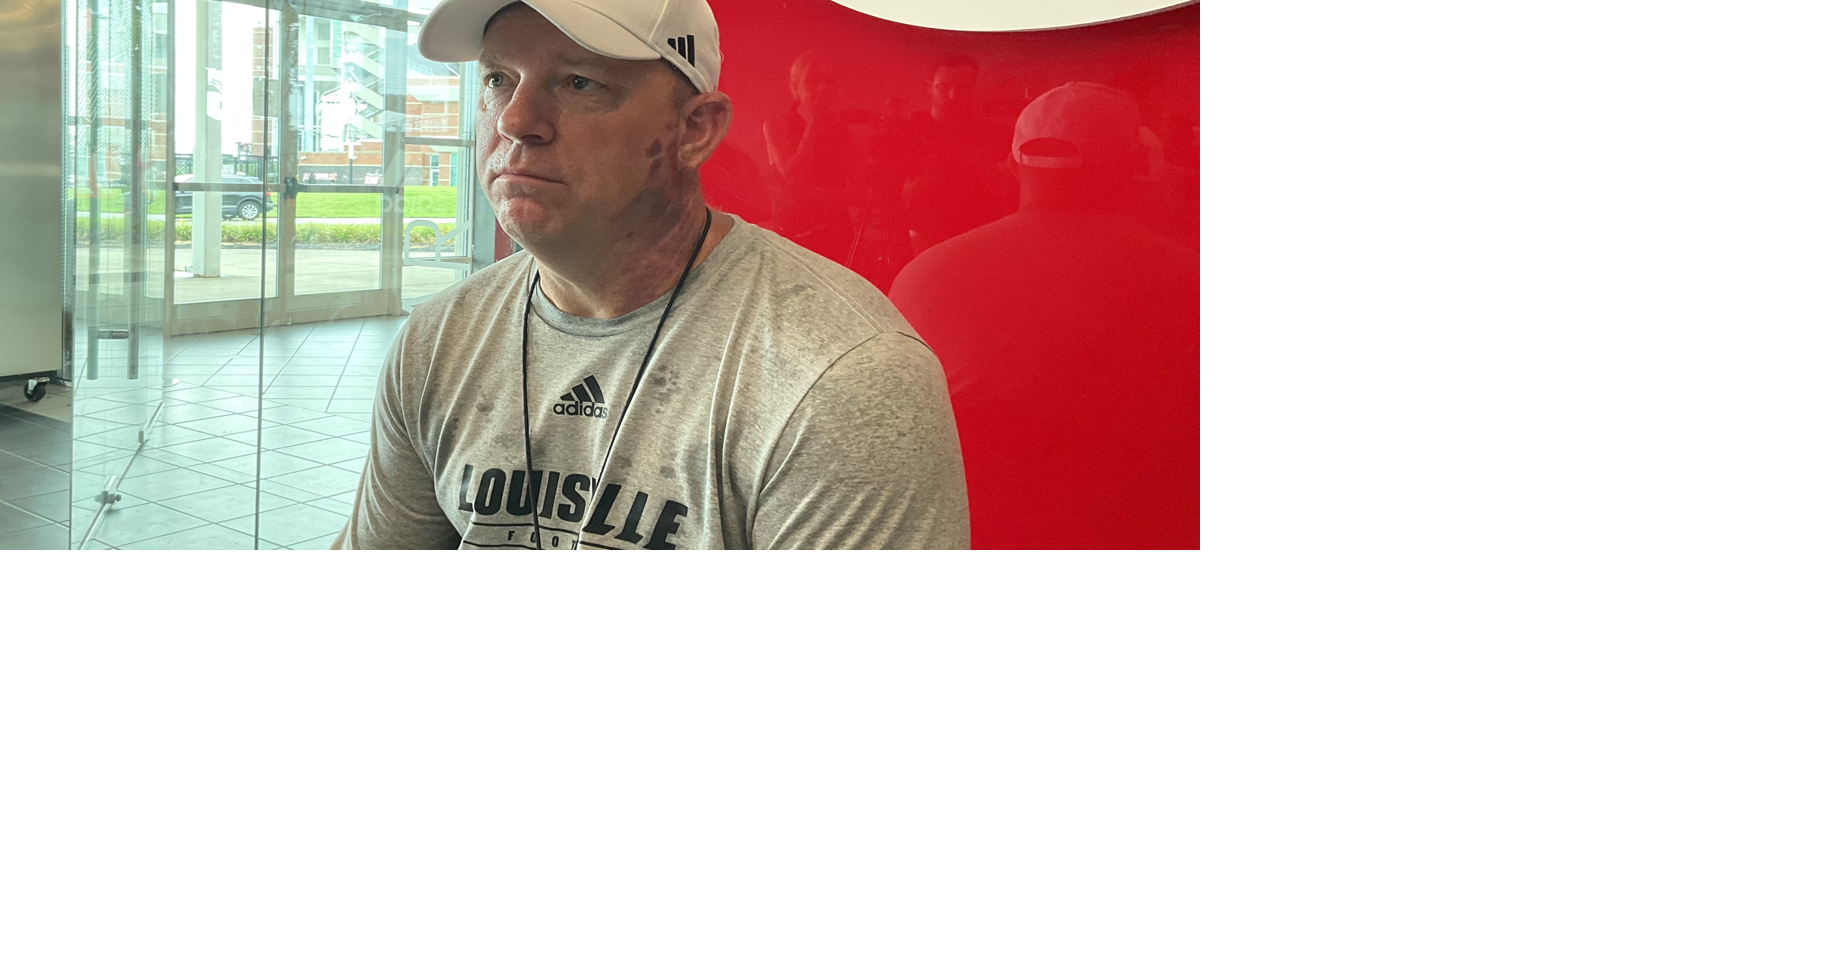 BOZICH | As interest soars in Louisville football, Indiana off Cards